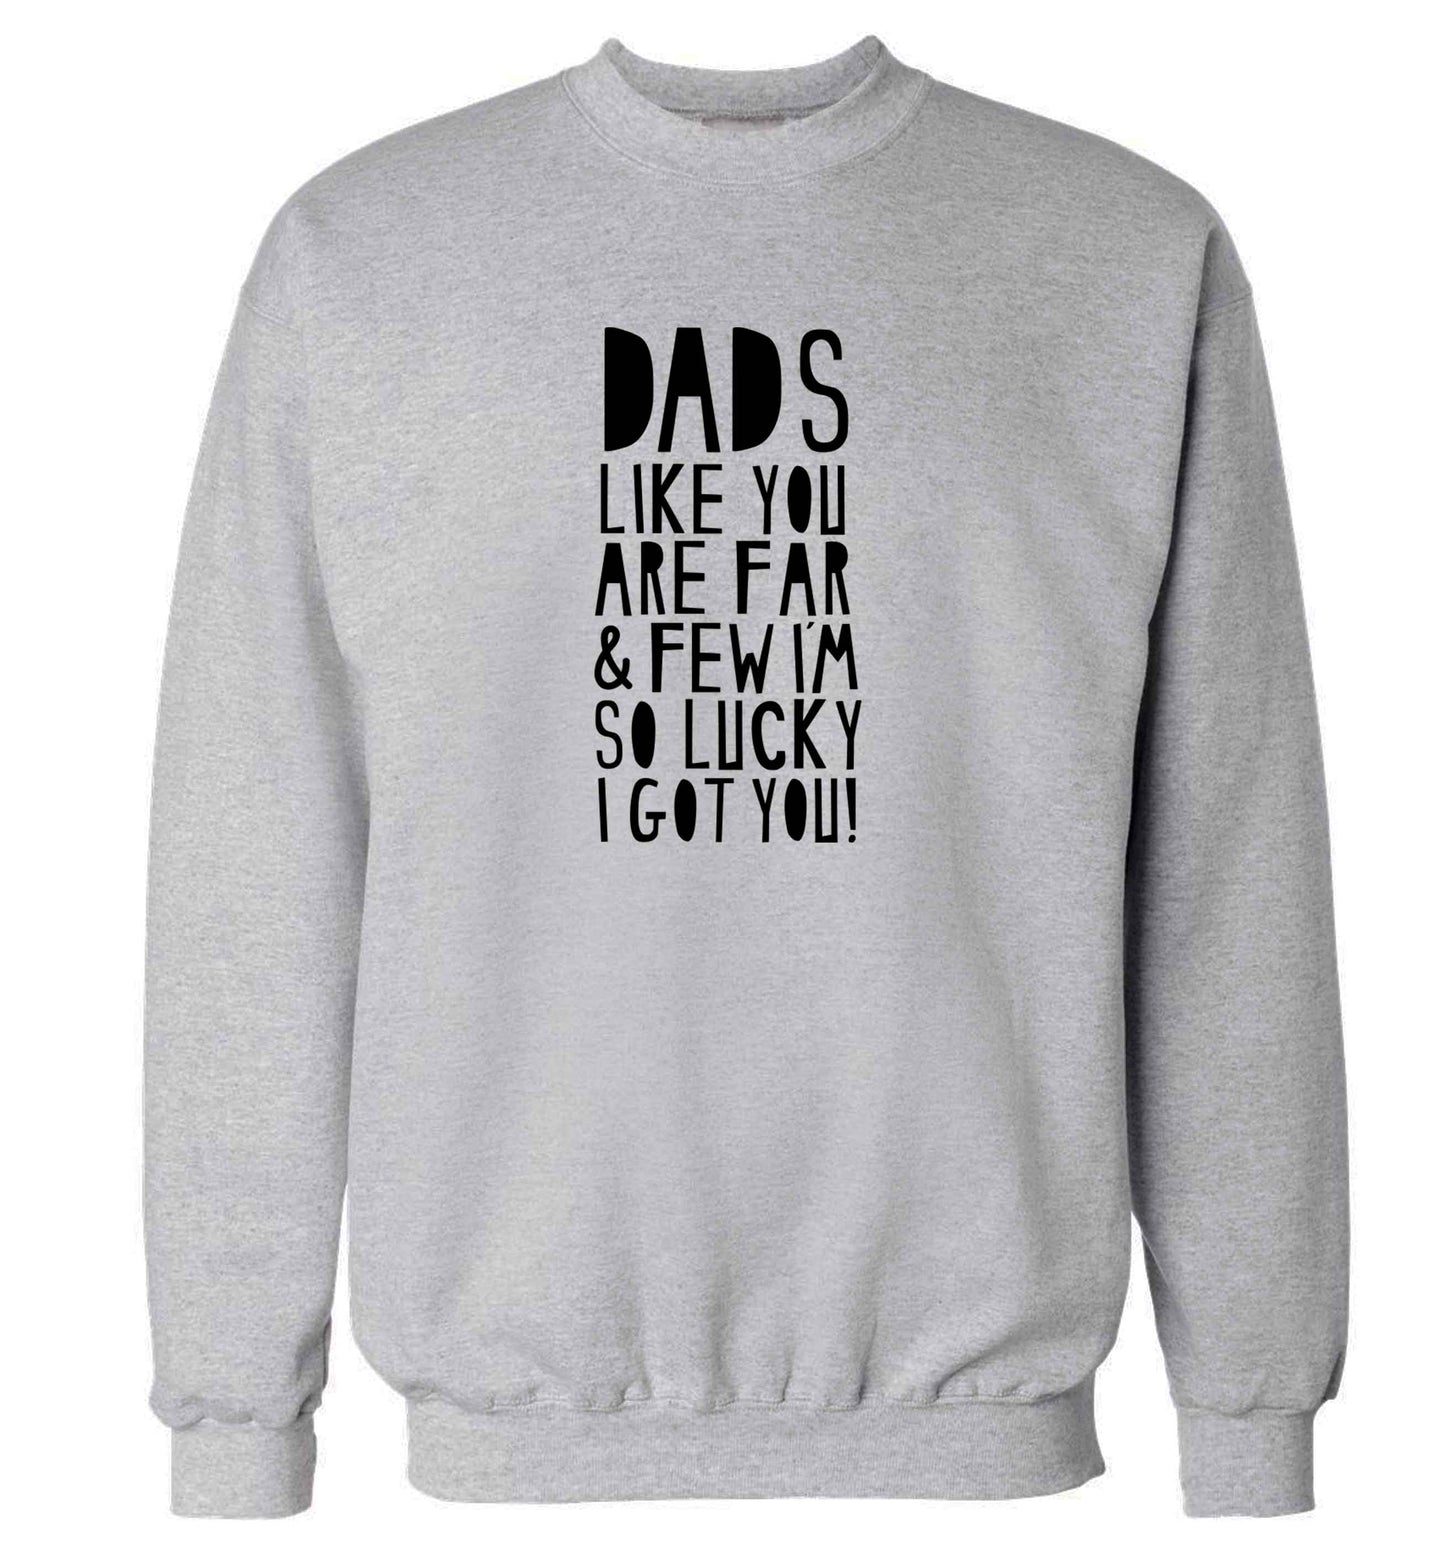 Dads like you are far and few I'm so luck I got you! adult's unisex grey sweater 2XL